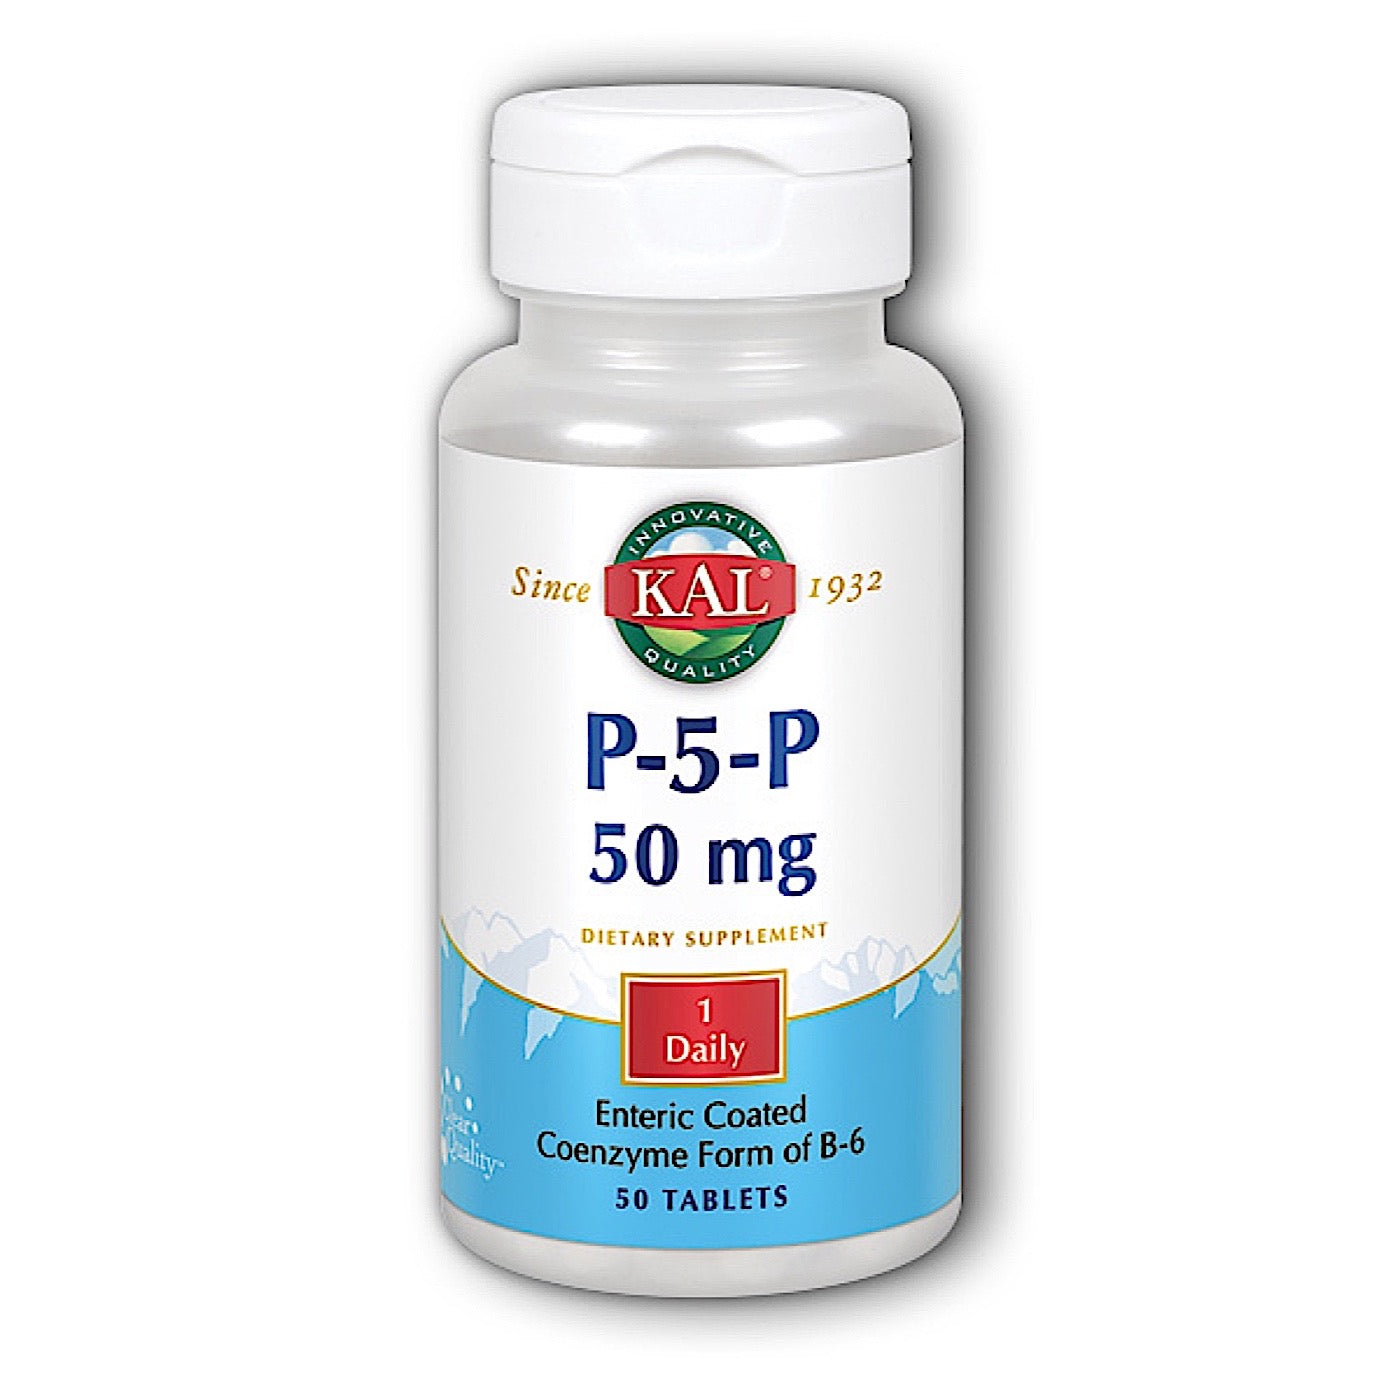 Kal P-5-P The Most Active Form Of B6 -- 50 Mg - 50 Tablets